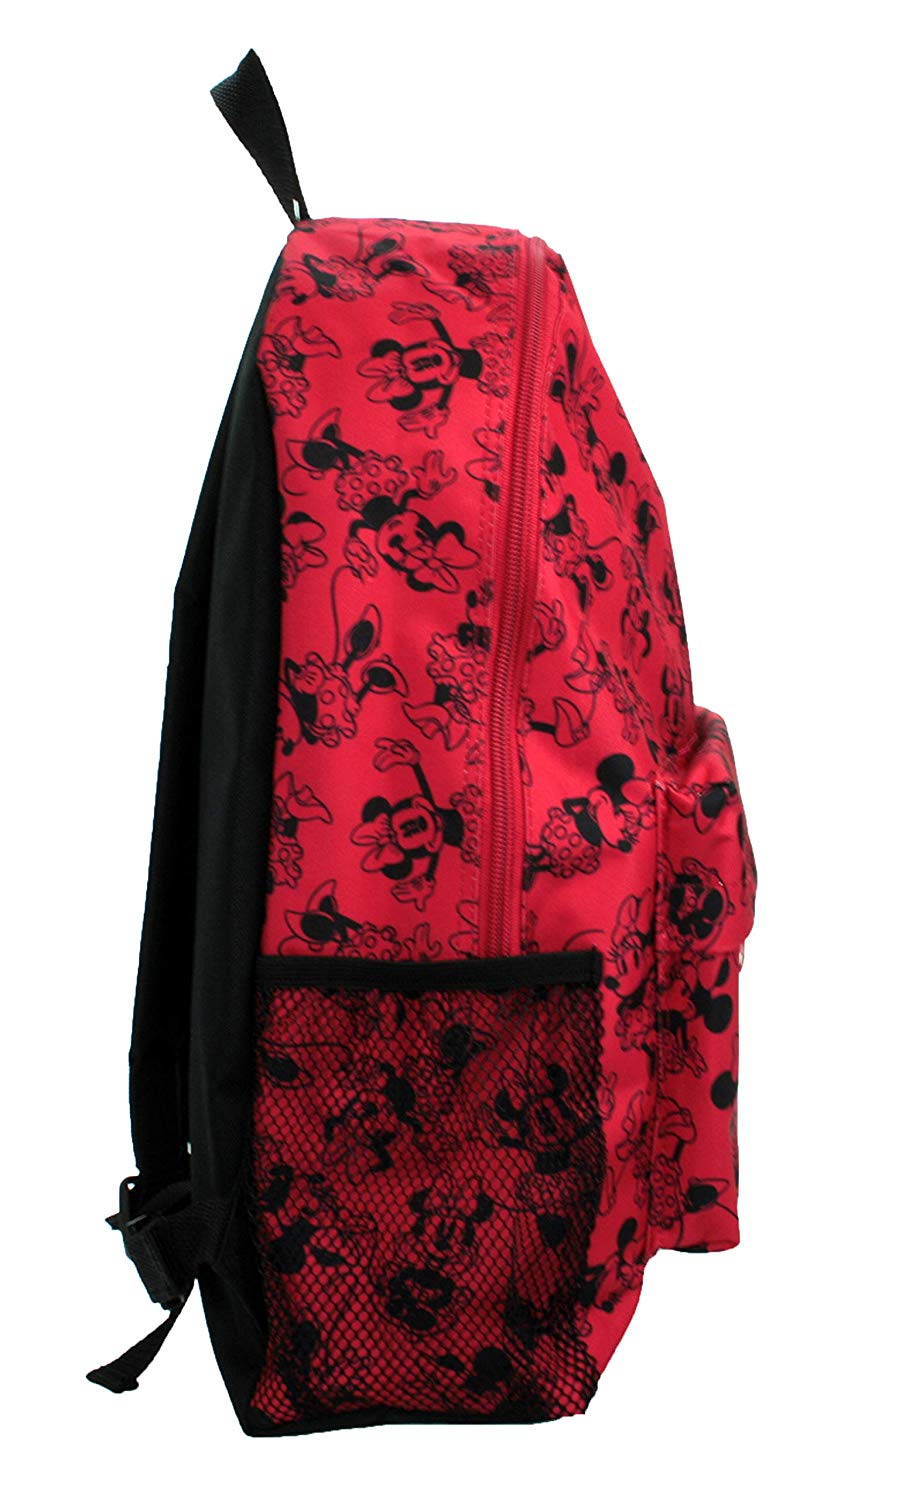 Minnie Mouse Poses Large Roxy Red & Black Disney Backpack School Bag Book Bag 